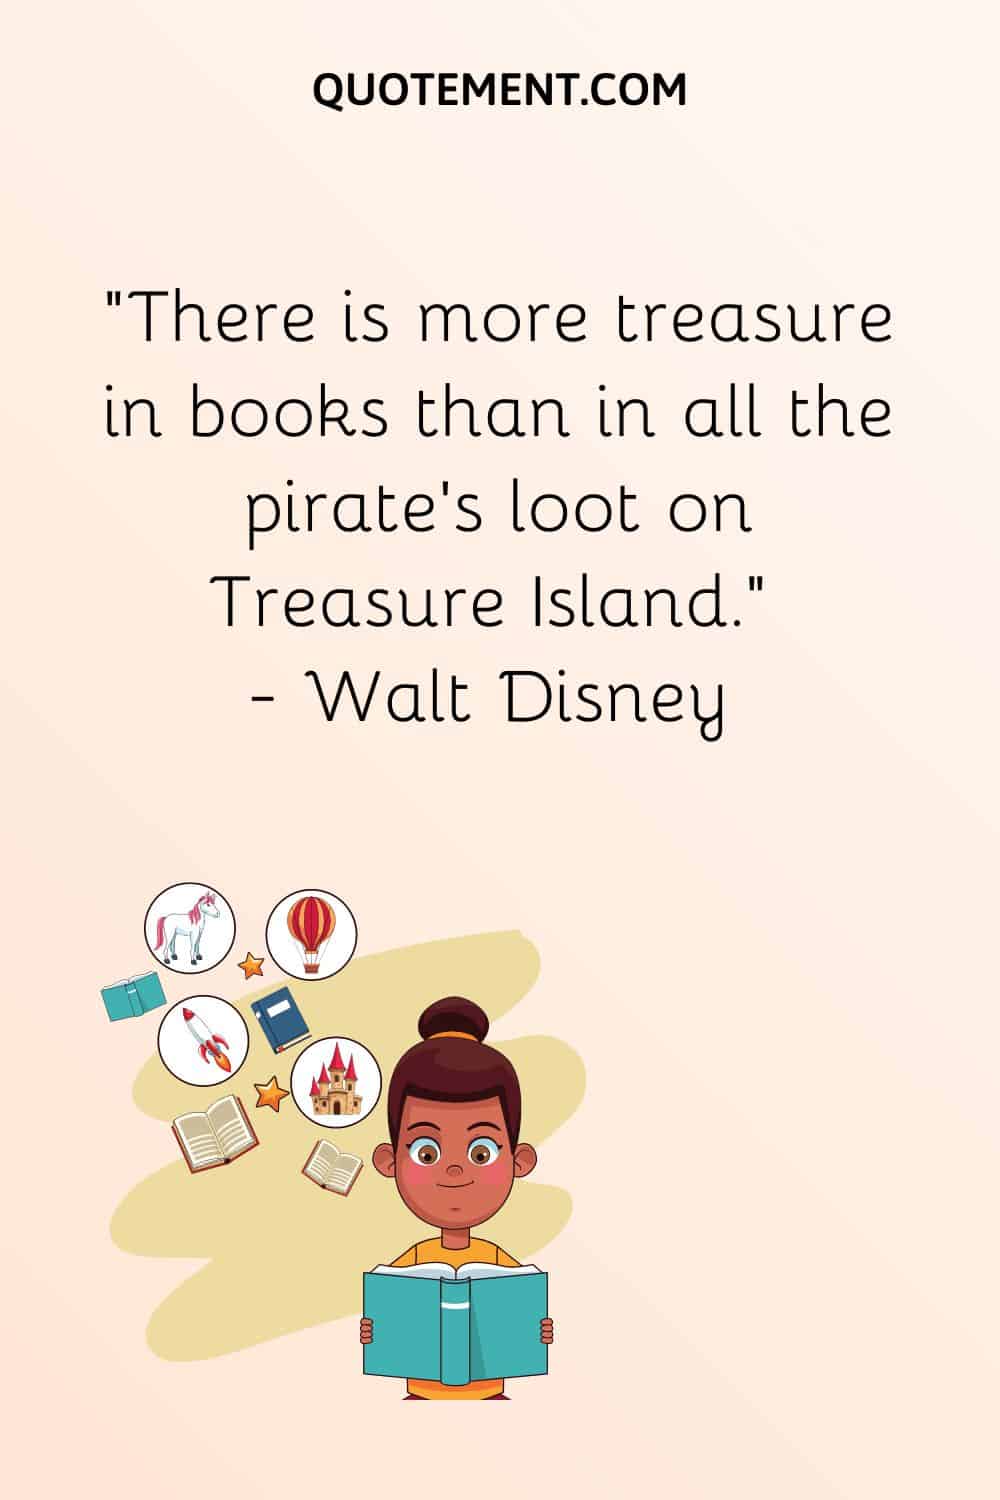 “There is more treasure in books than in all the pirate’s loot on Treasure Island.” — Walt Disney